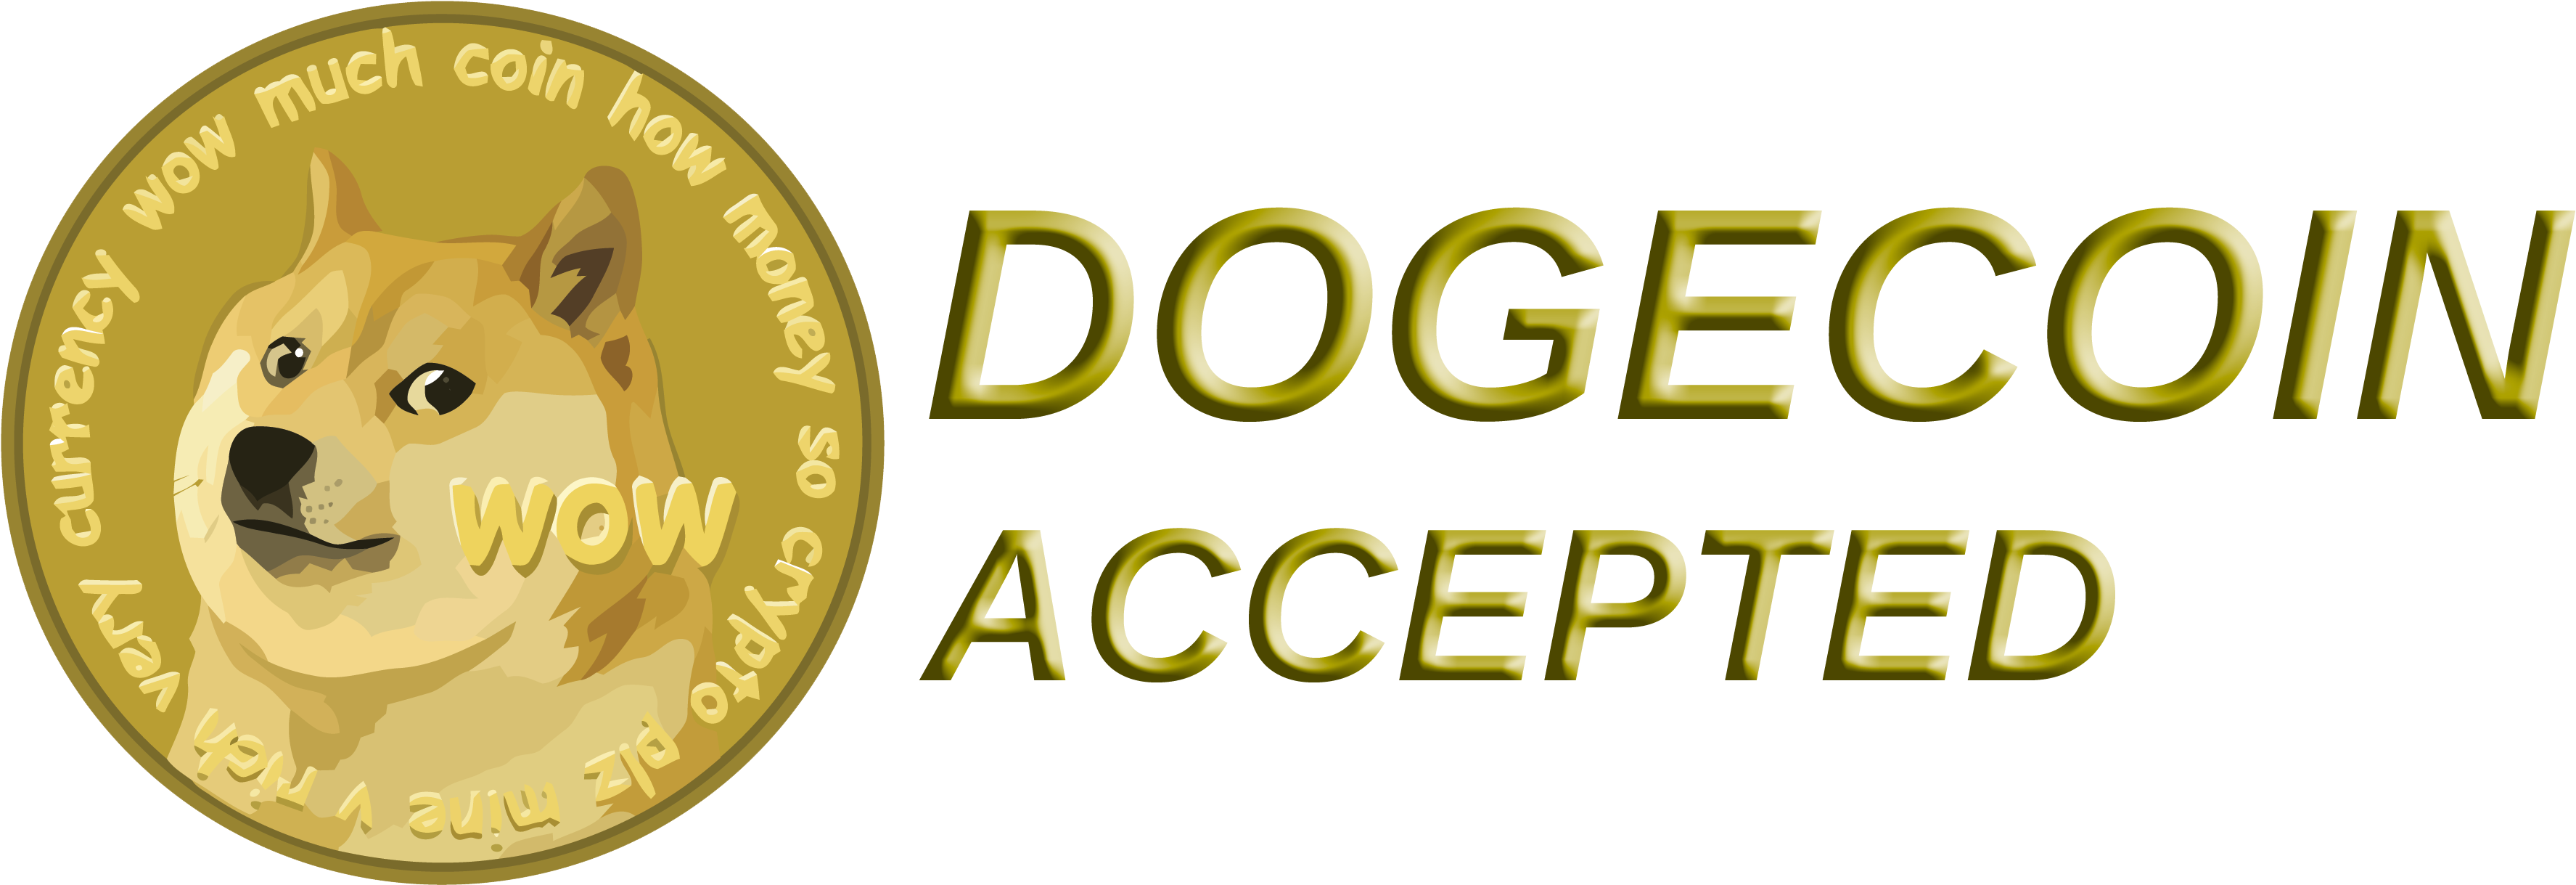 Dogecoin Accepted Payment PNG Transparent Image